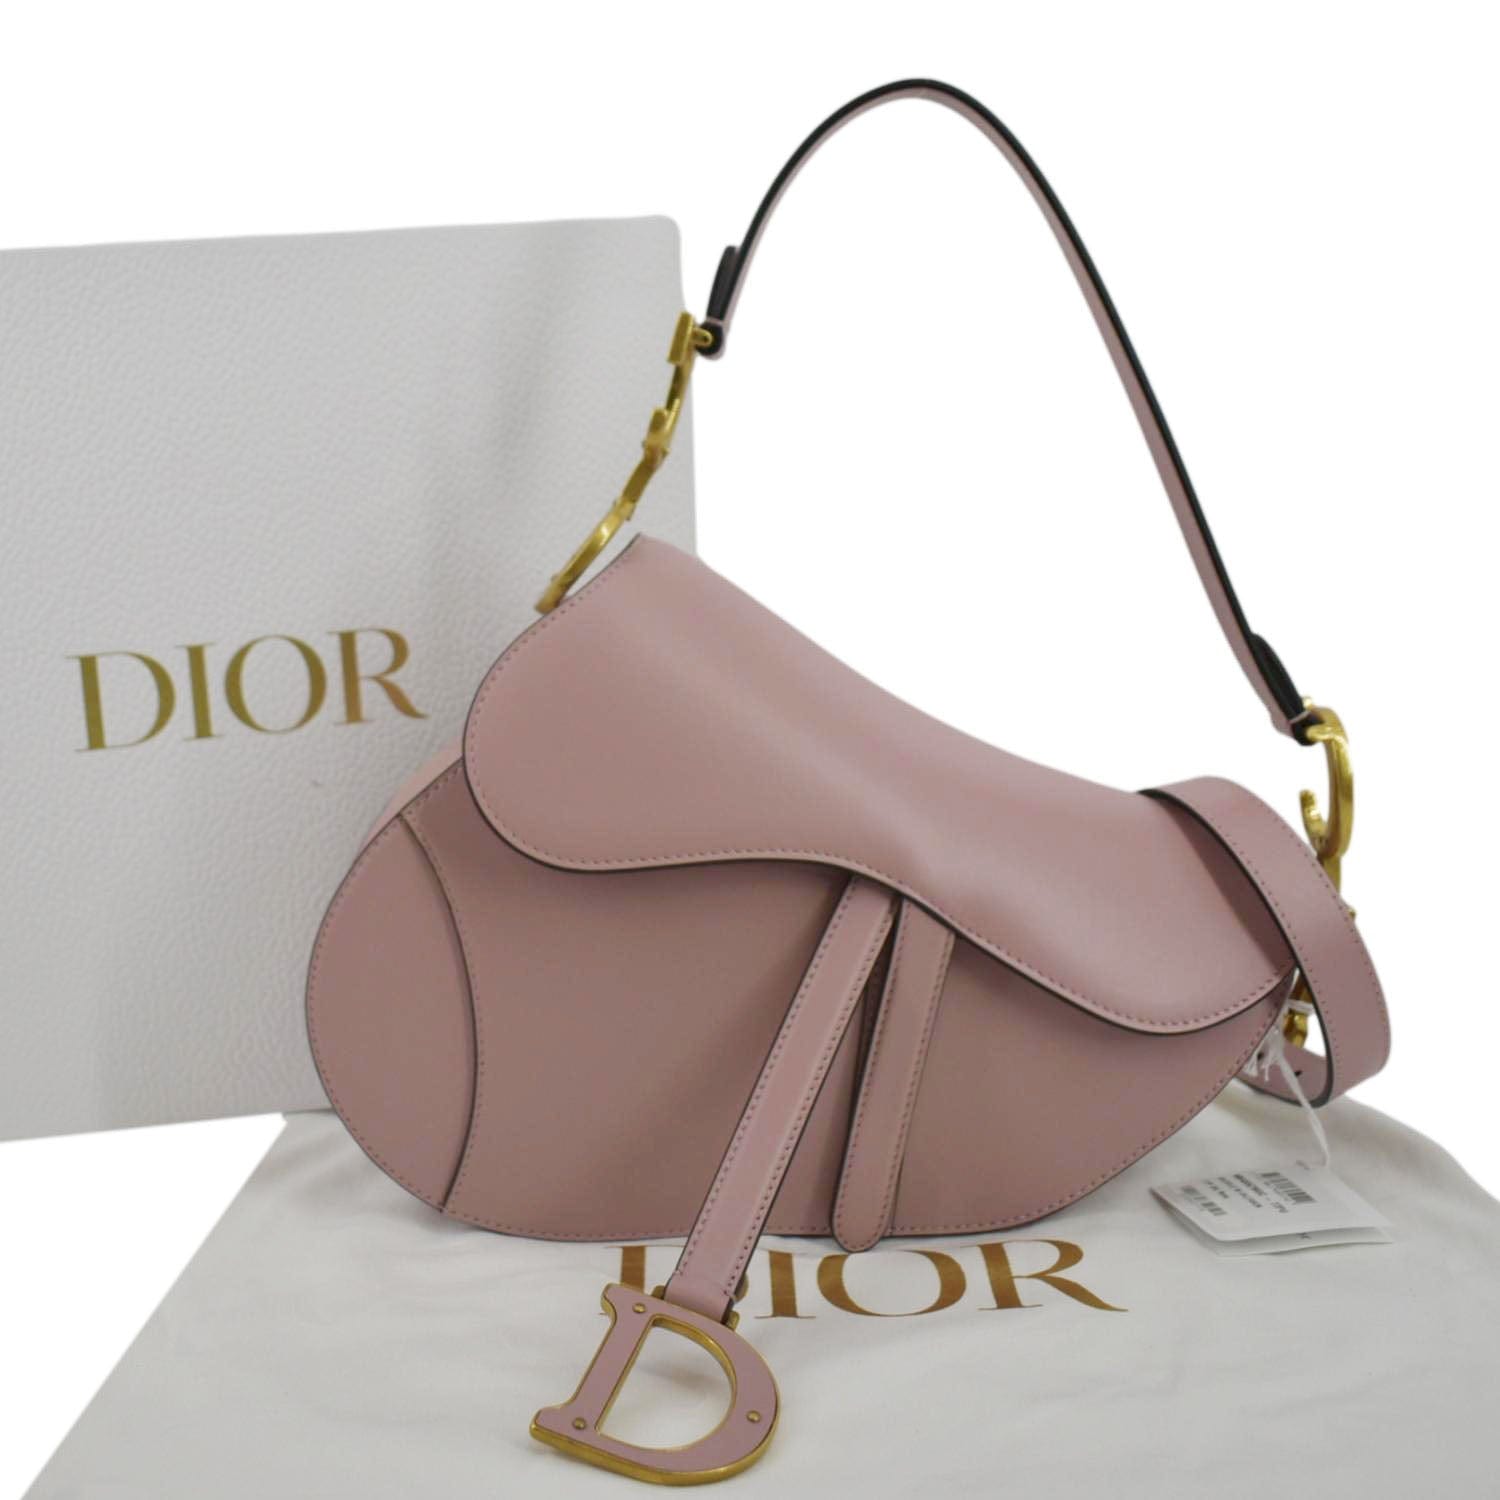 Dior Saddle Bags & Handbags for Women, Authenticity Guaranteed